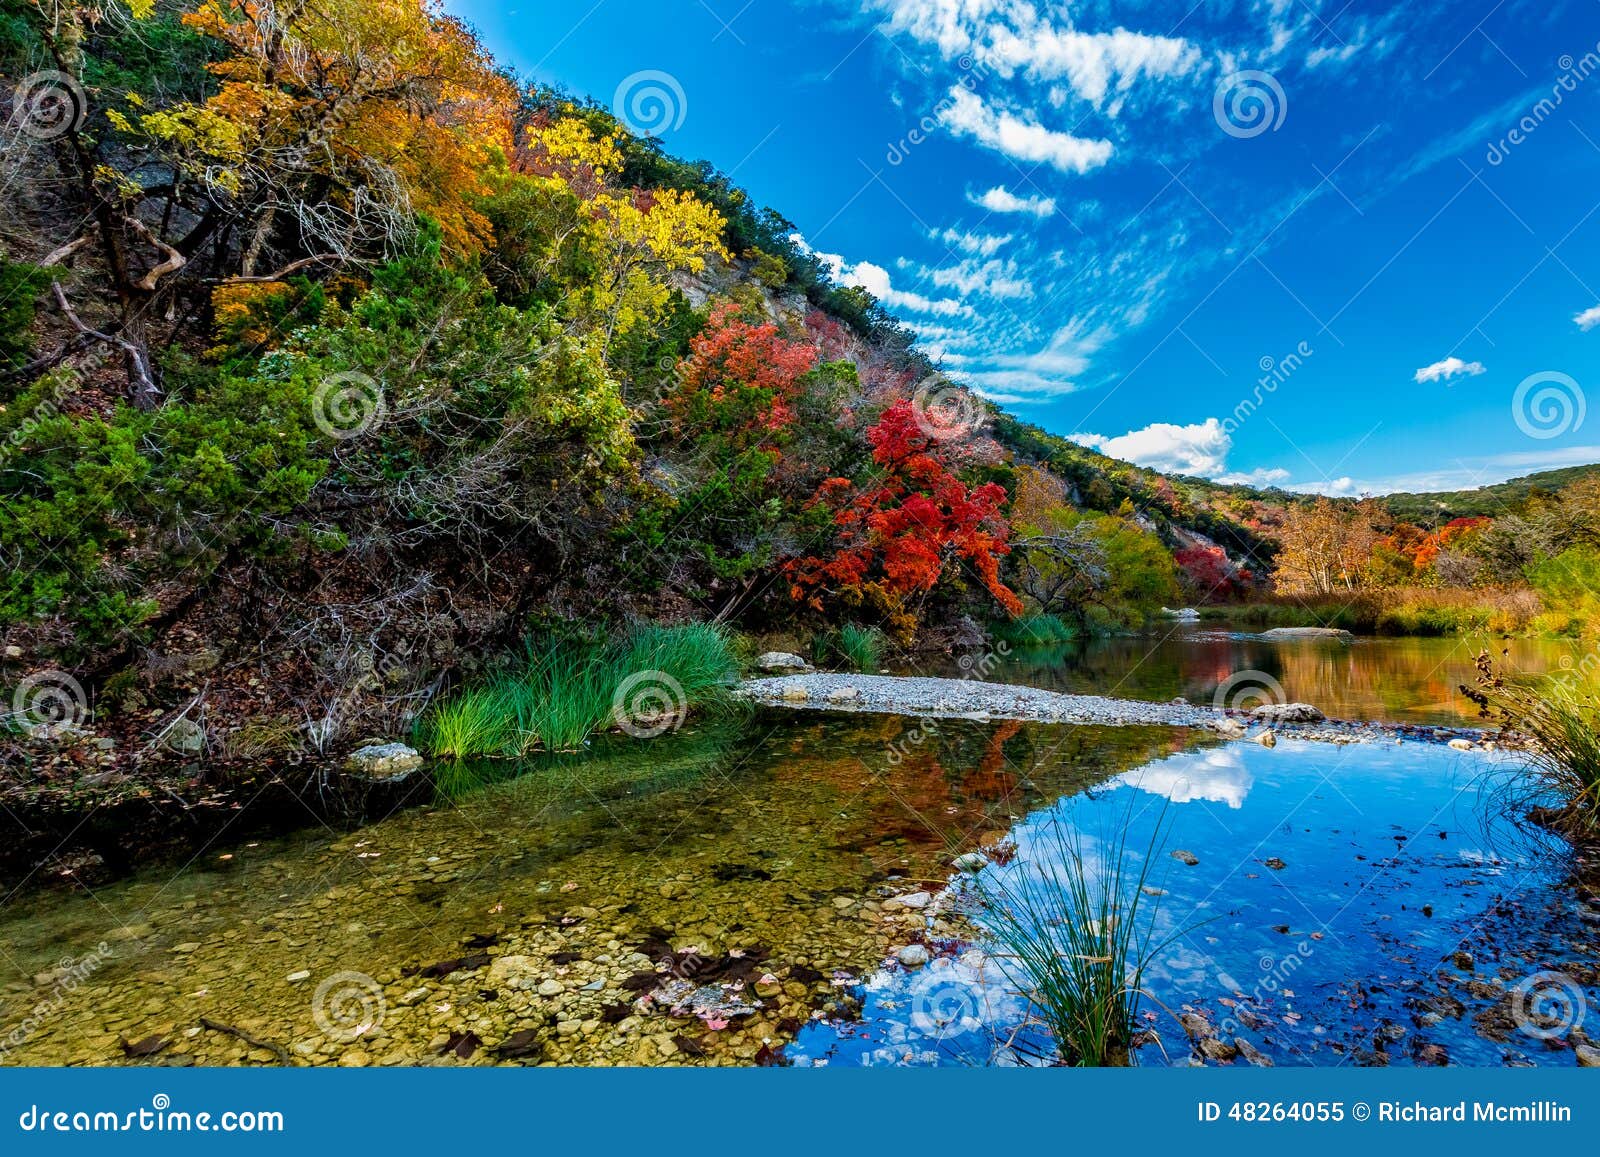 beautiful landscape of fall foliage and clear creek at lost maples state park, texas